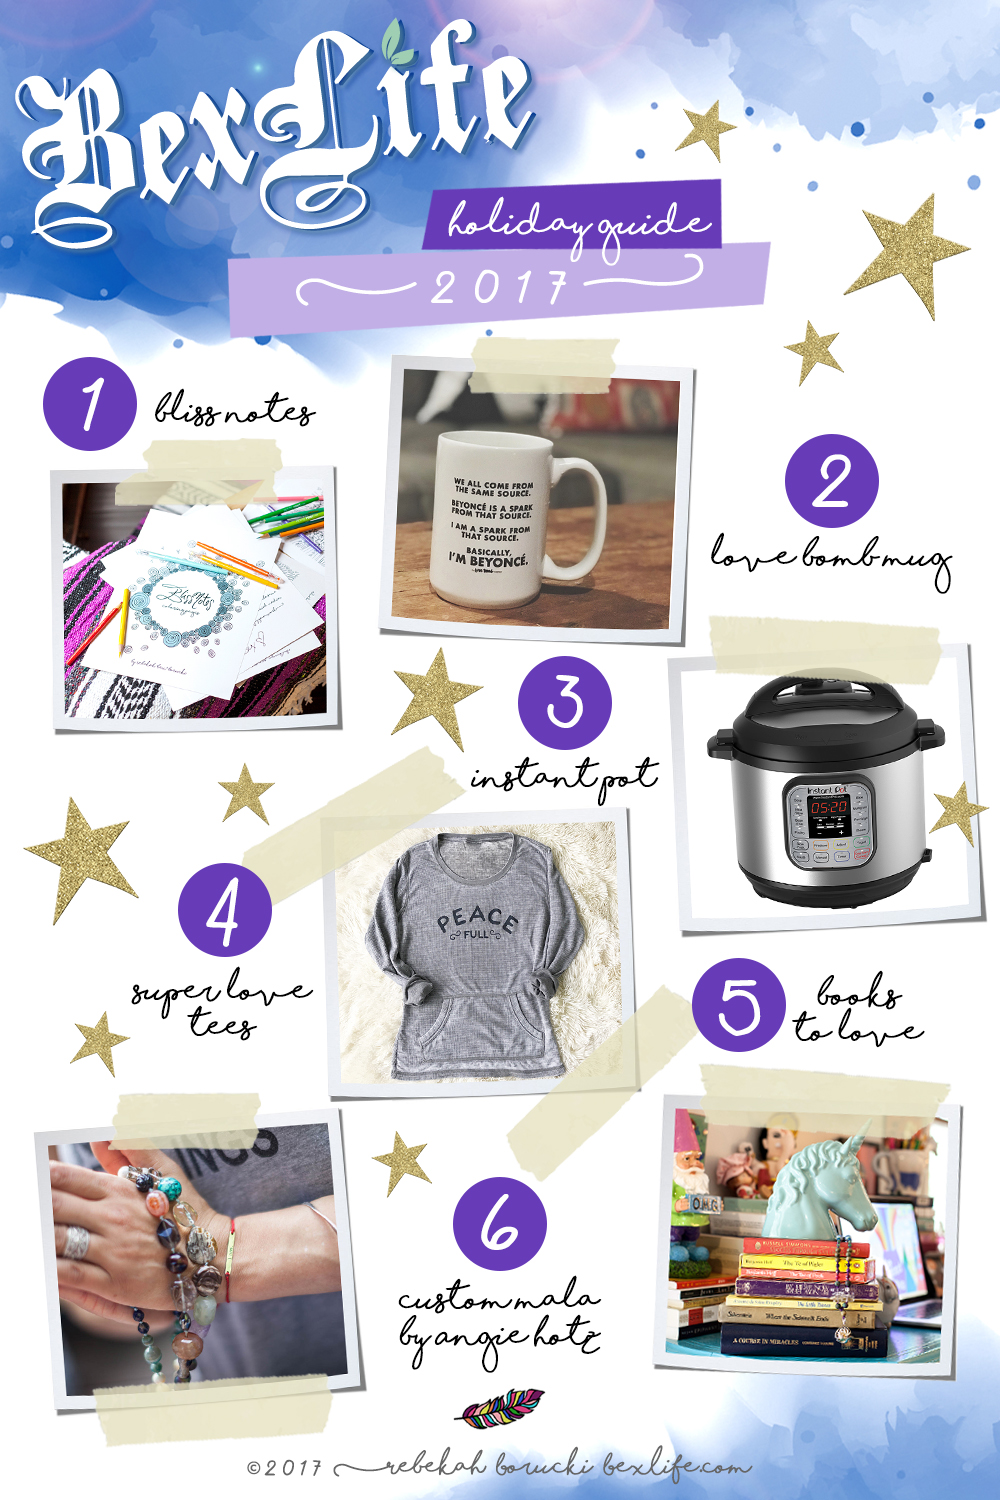 My Favorite Gifts for Body, Mind, and Spirit Under $100 - BexLife Holiday Gift Guide